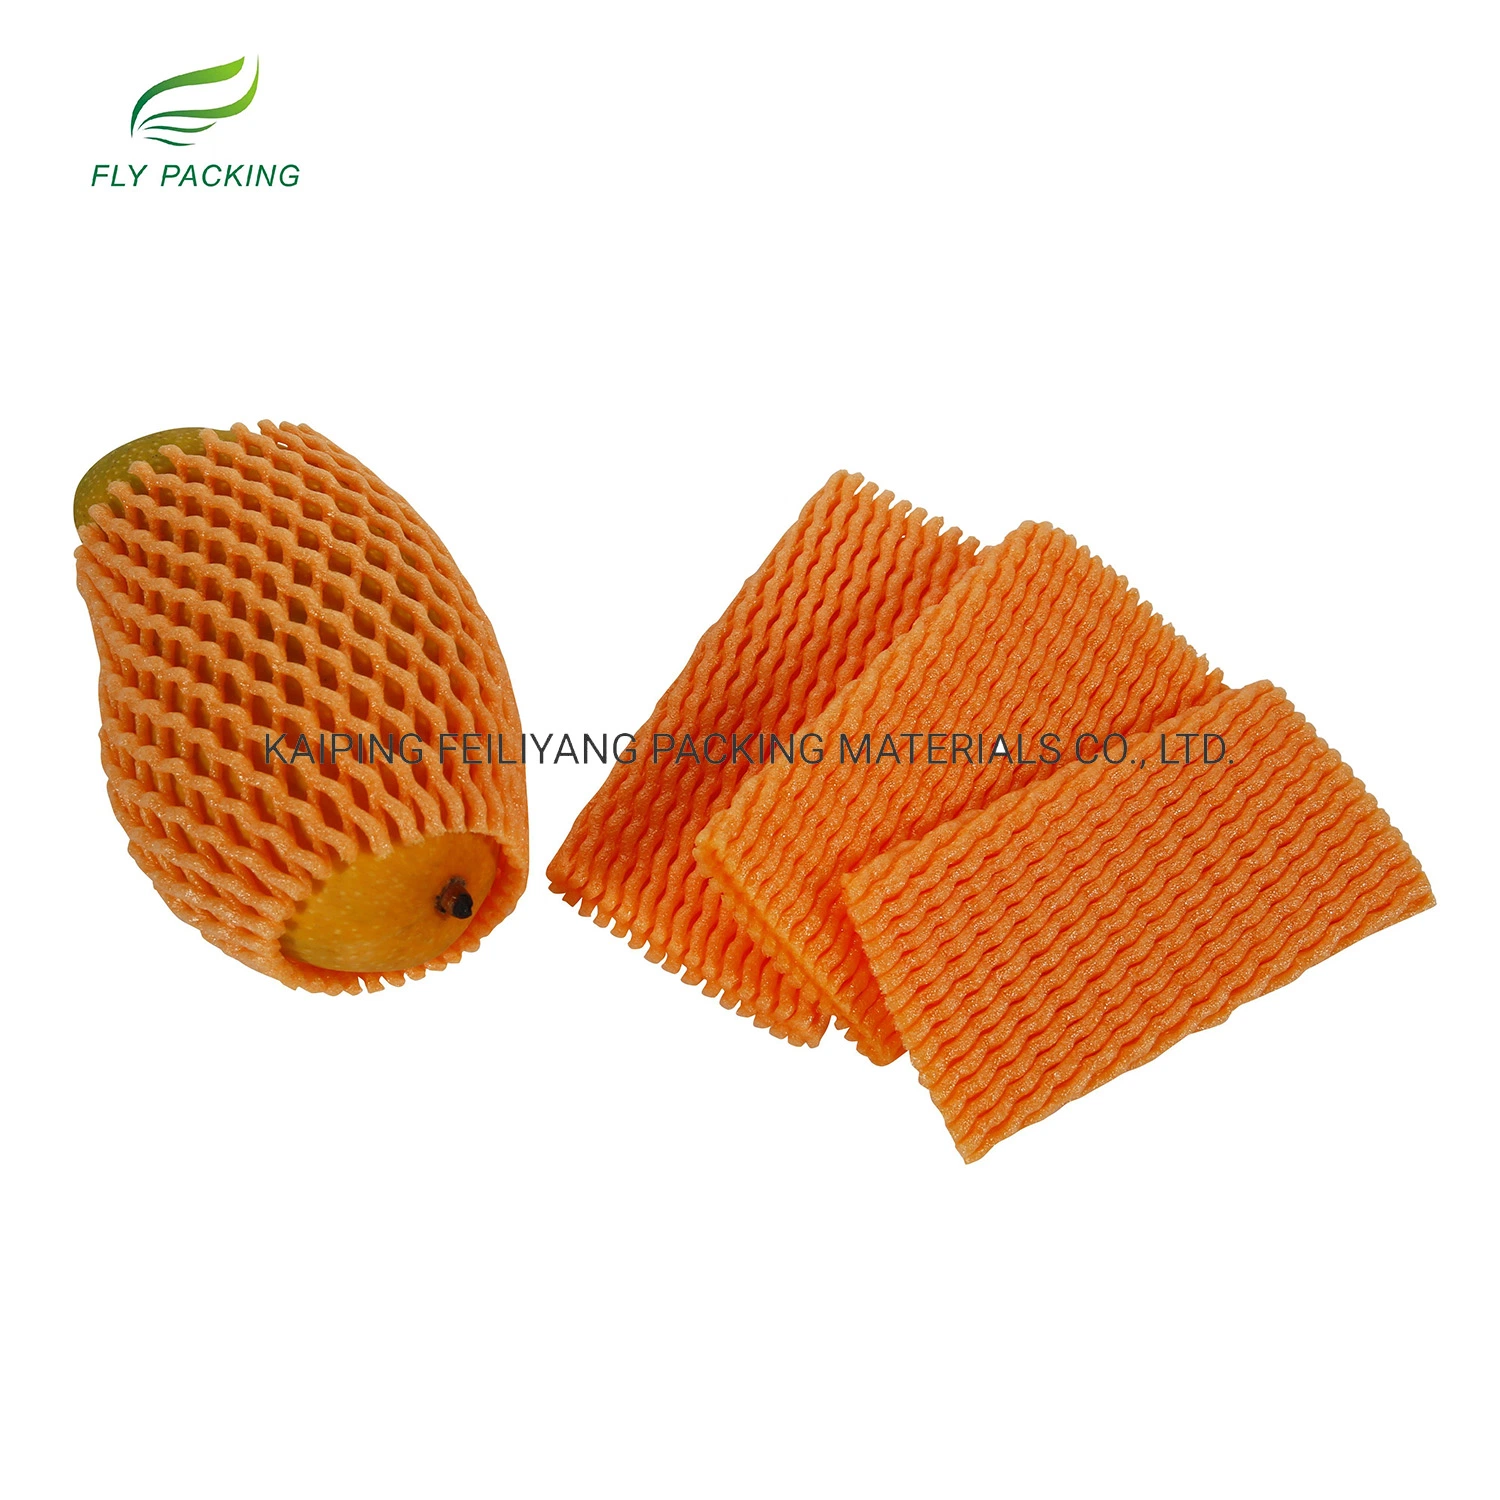 Special Wholesale Environmental Protection Non-Toxic Packing Material Foam Net